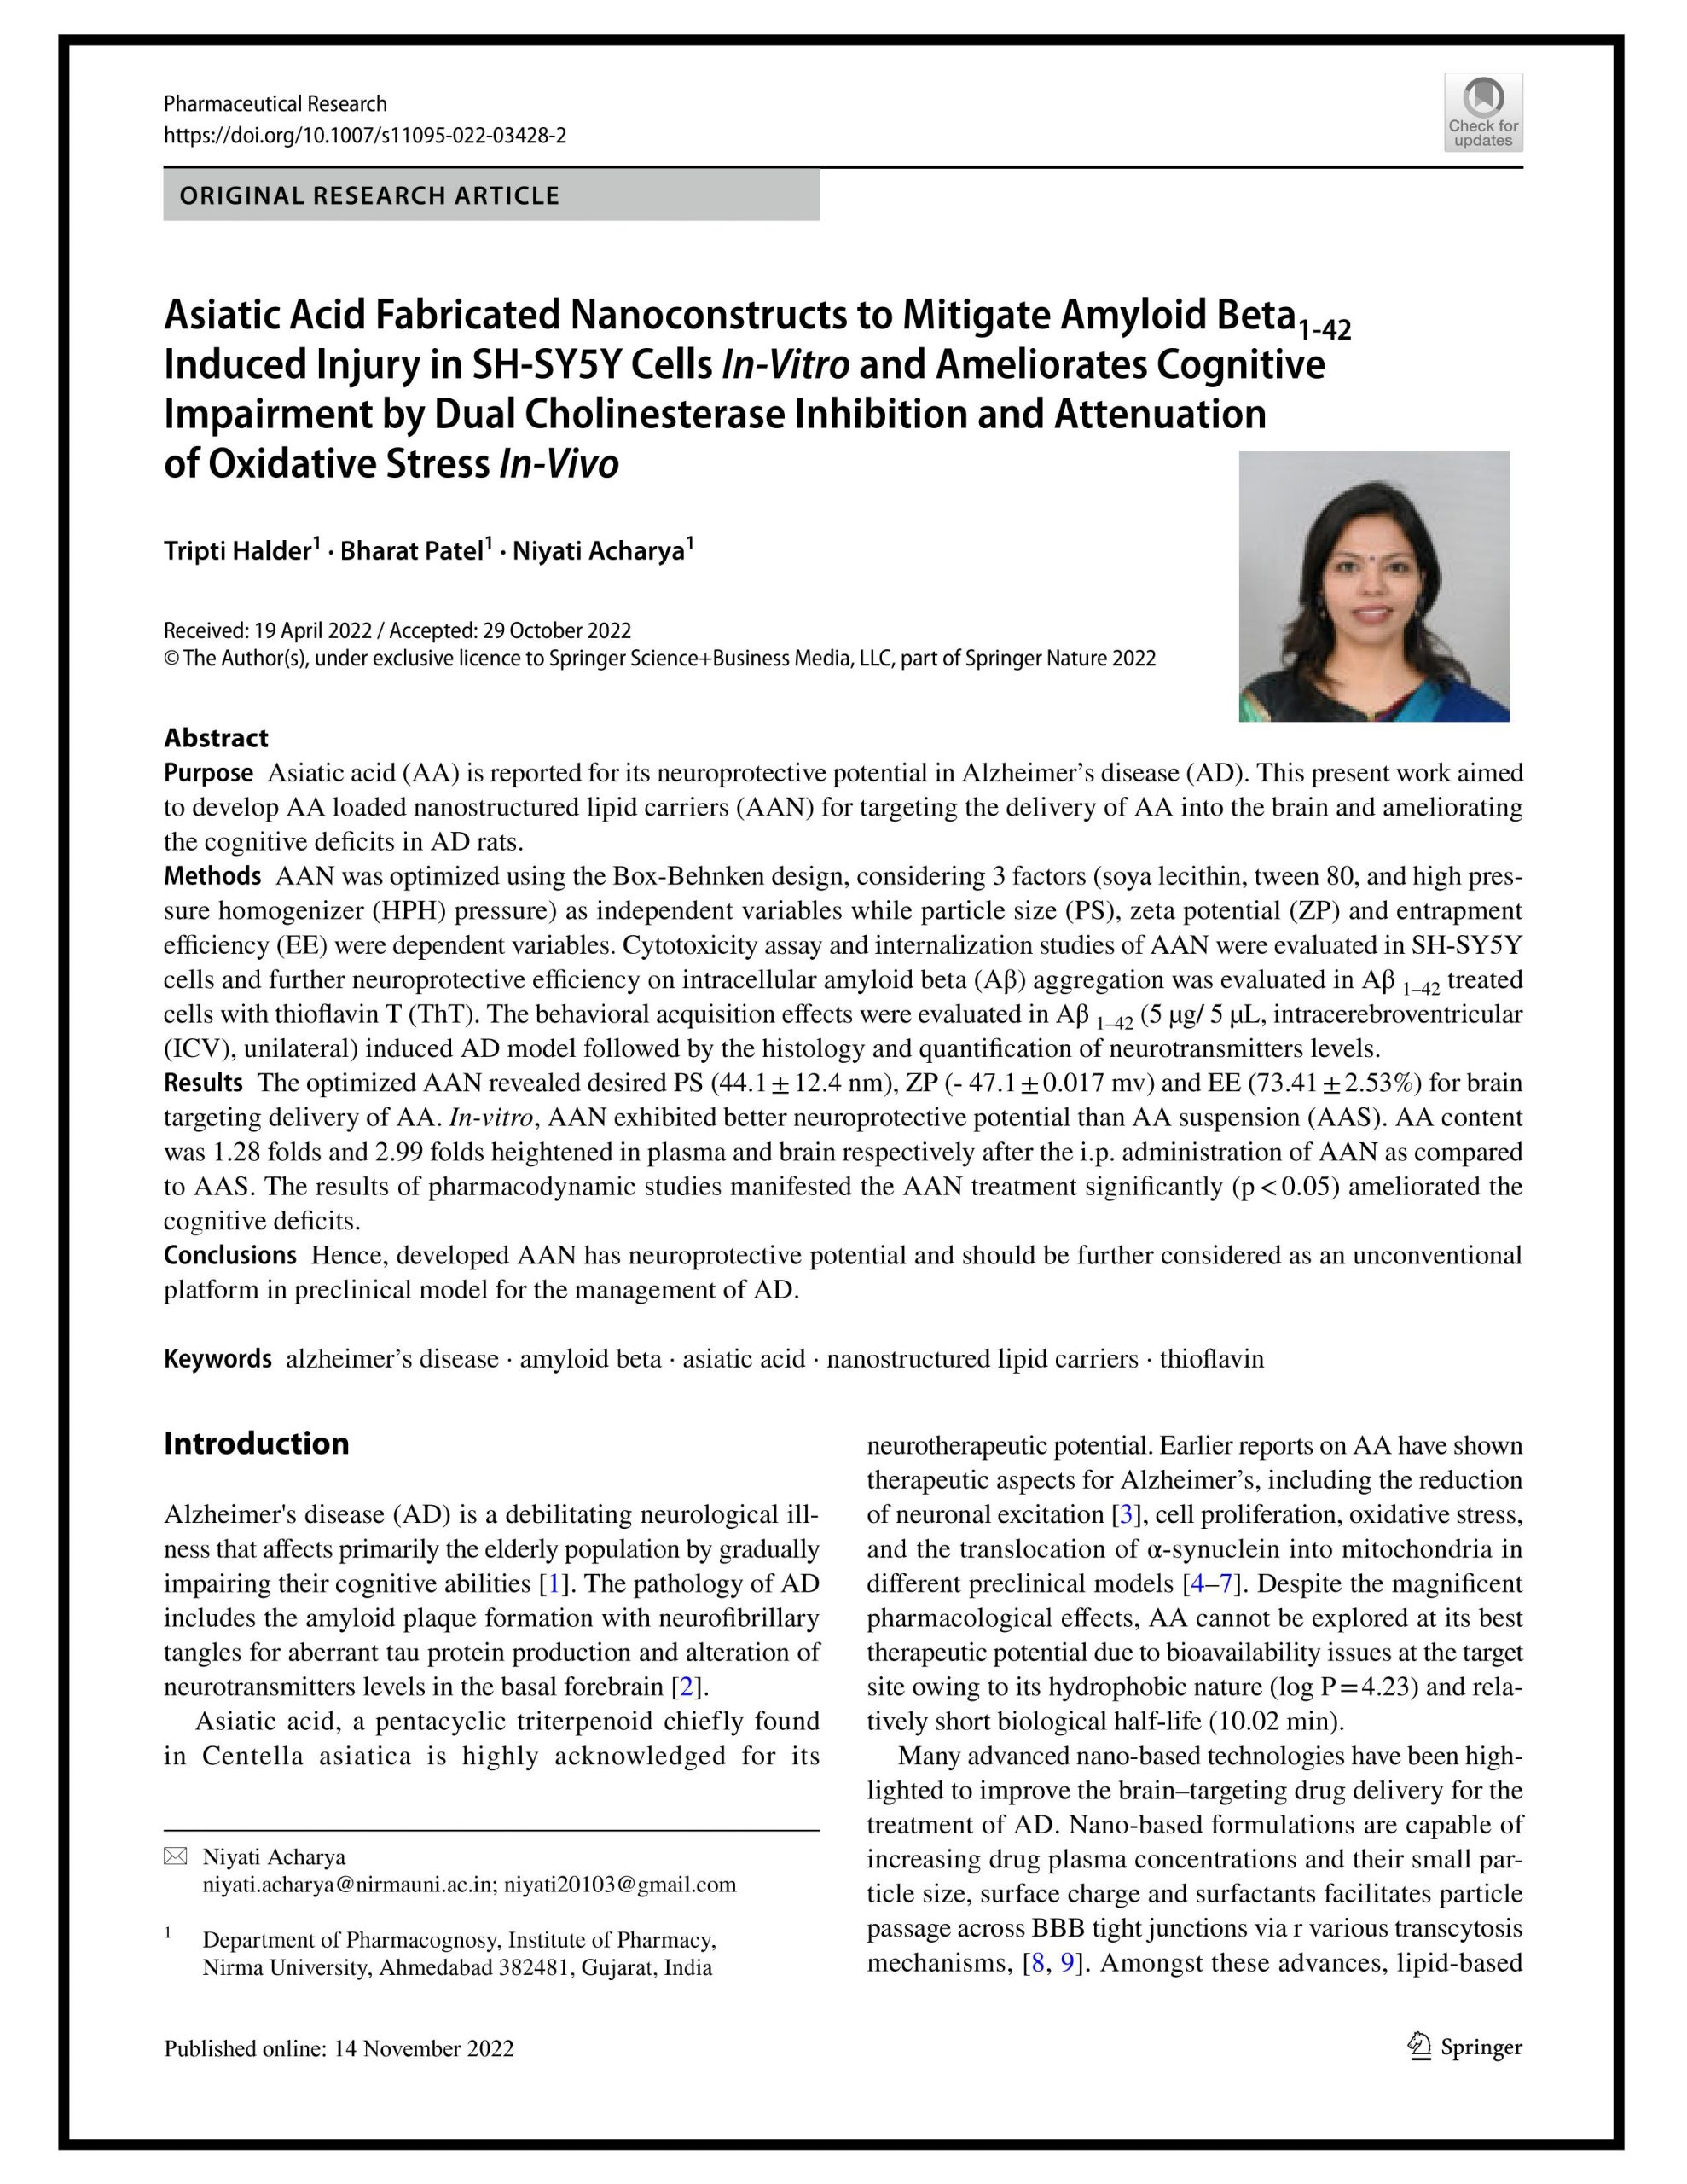 Asiatic Acid Fabricated Nanoconstructs to Mitigate Amyloid Beta1-42 Induced Injury in SH-SY5Y Cells In-Vitro and Ameliorates Cognitive Impairment by Dual Cholinesterase Inhibition and Attenuation of Oxidative Stress In-Vivo